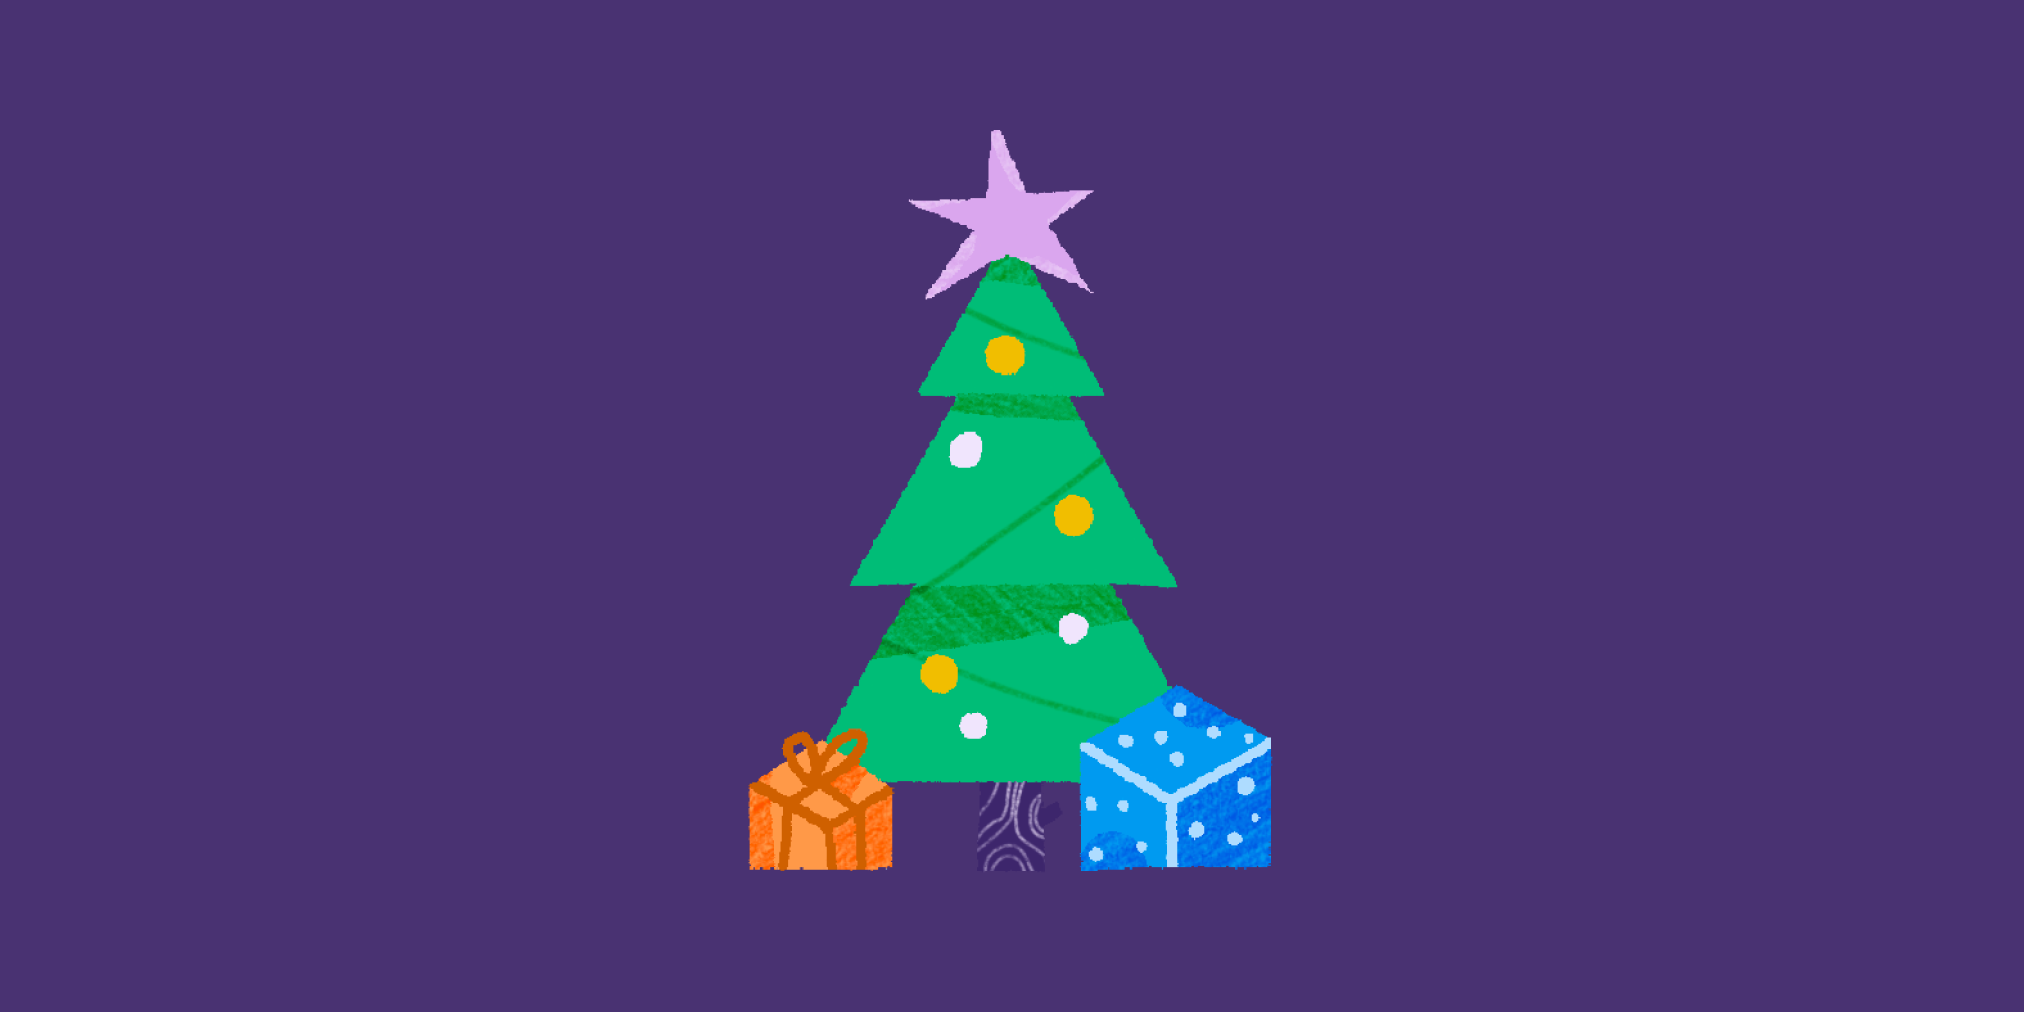 an illustration of a christmas tree on a purple background